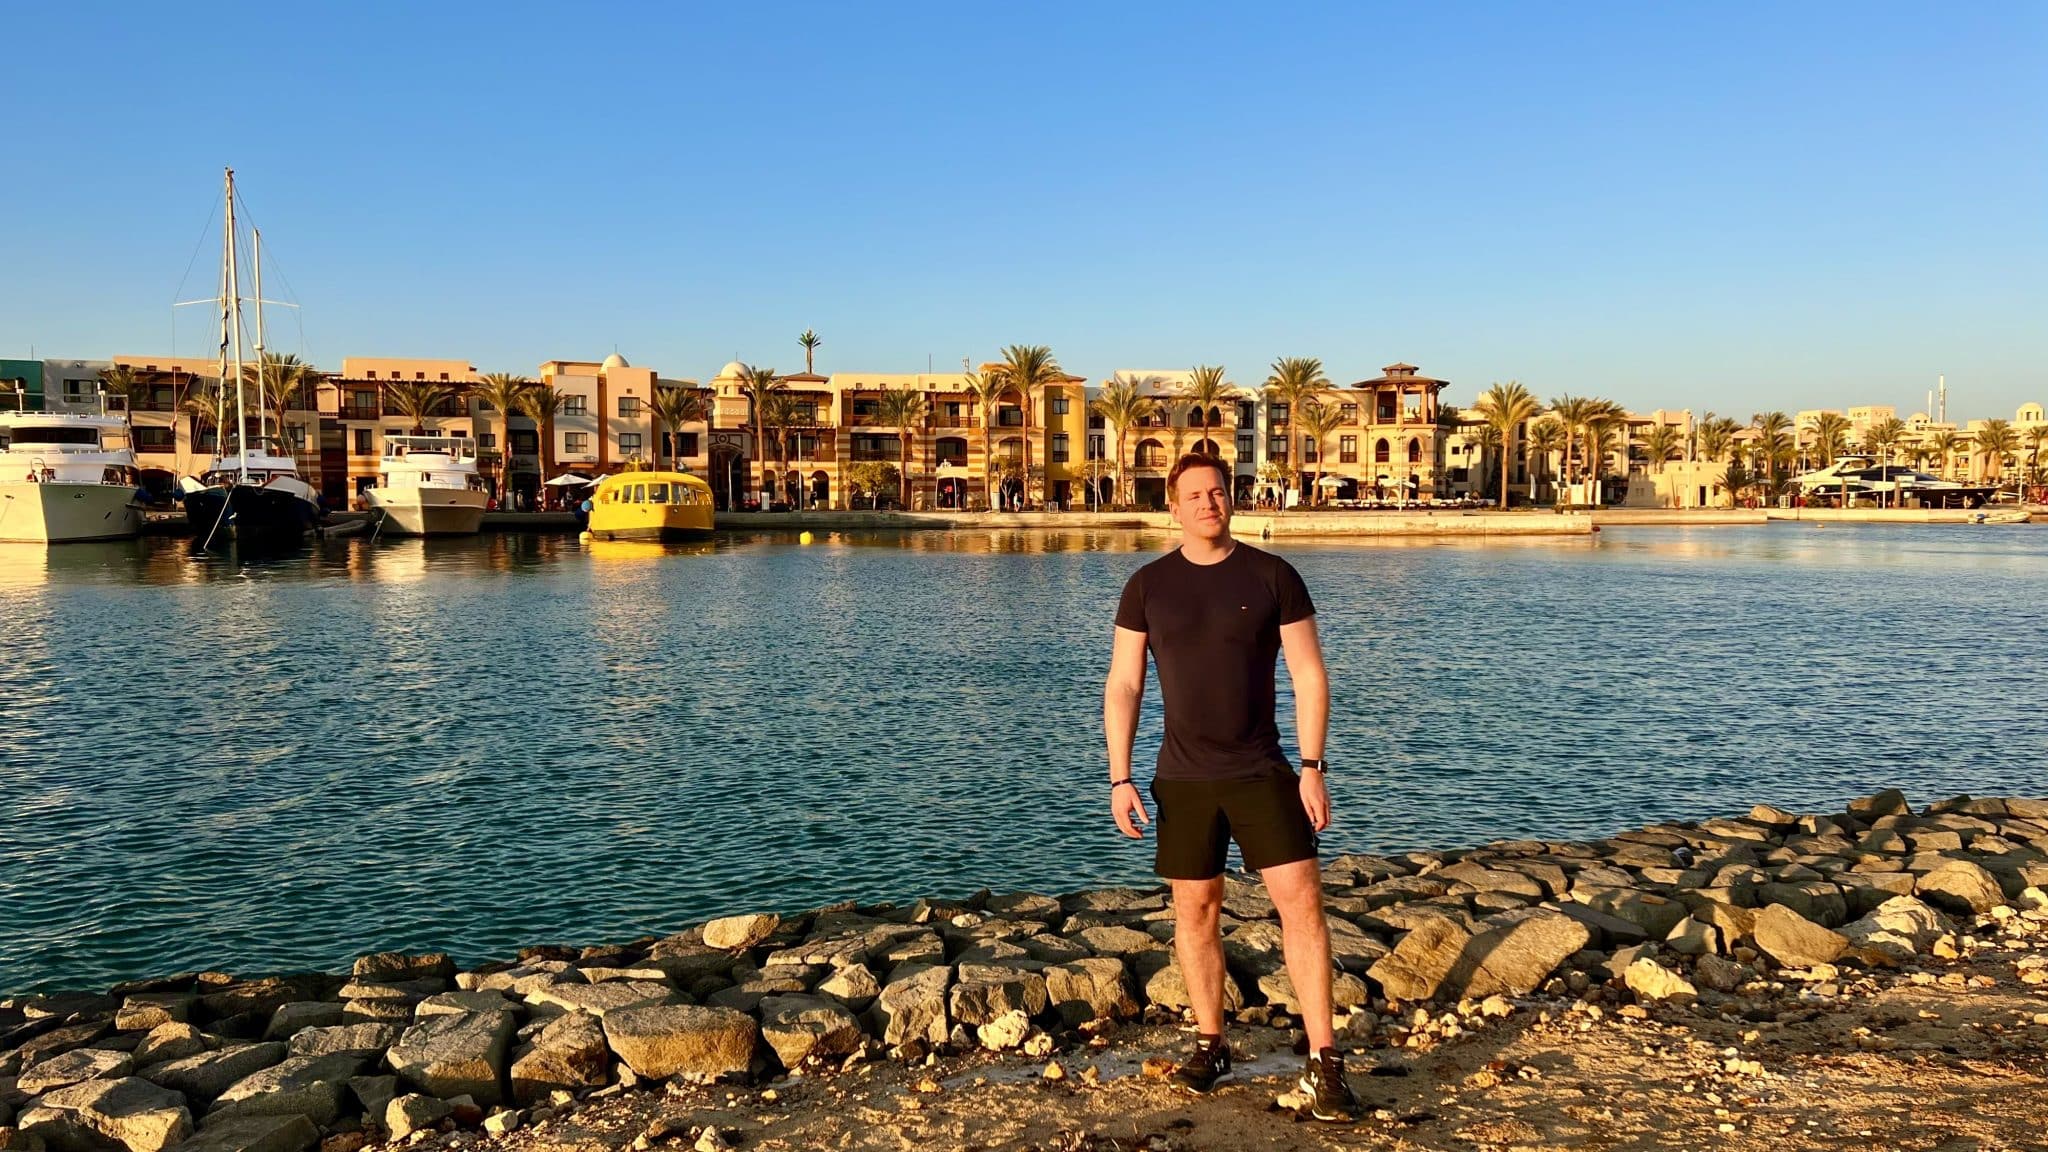 Jogging in Egypt experience report – walking through the desert?